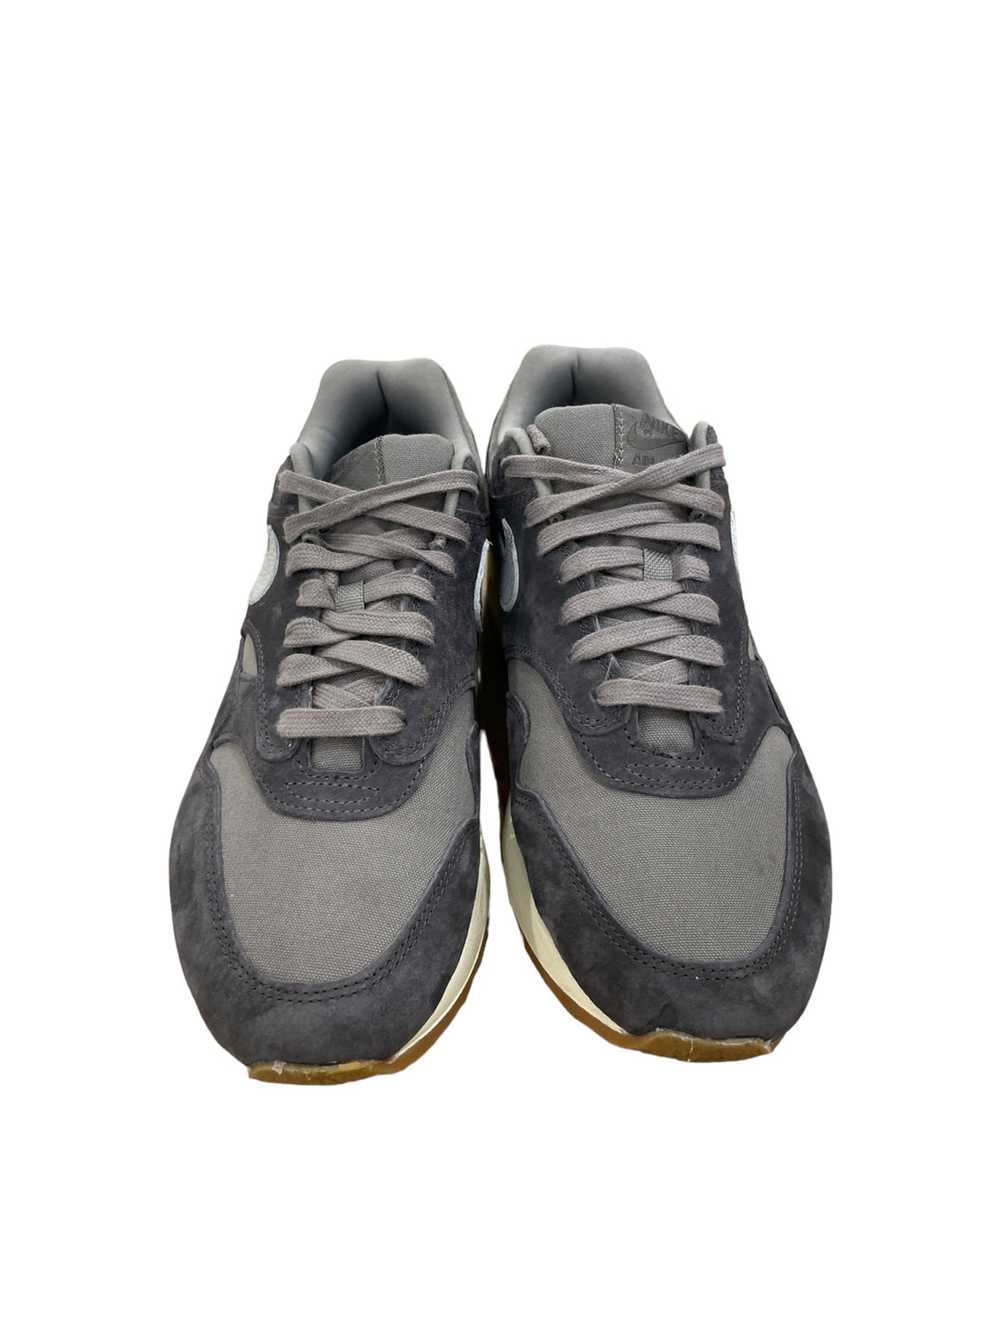 NIKE/Low-Sneakers/US 9/Suede/GRY/AIR MAX 1 - image 2